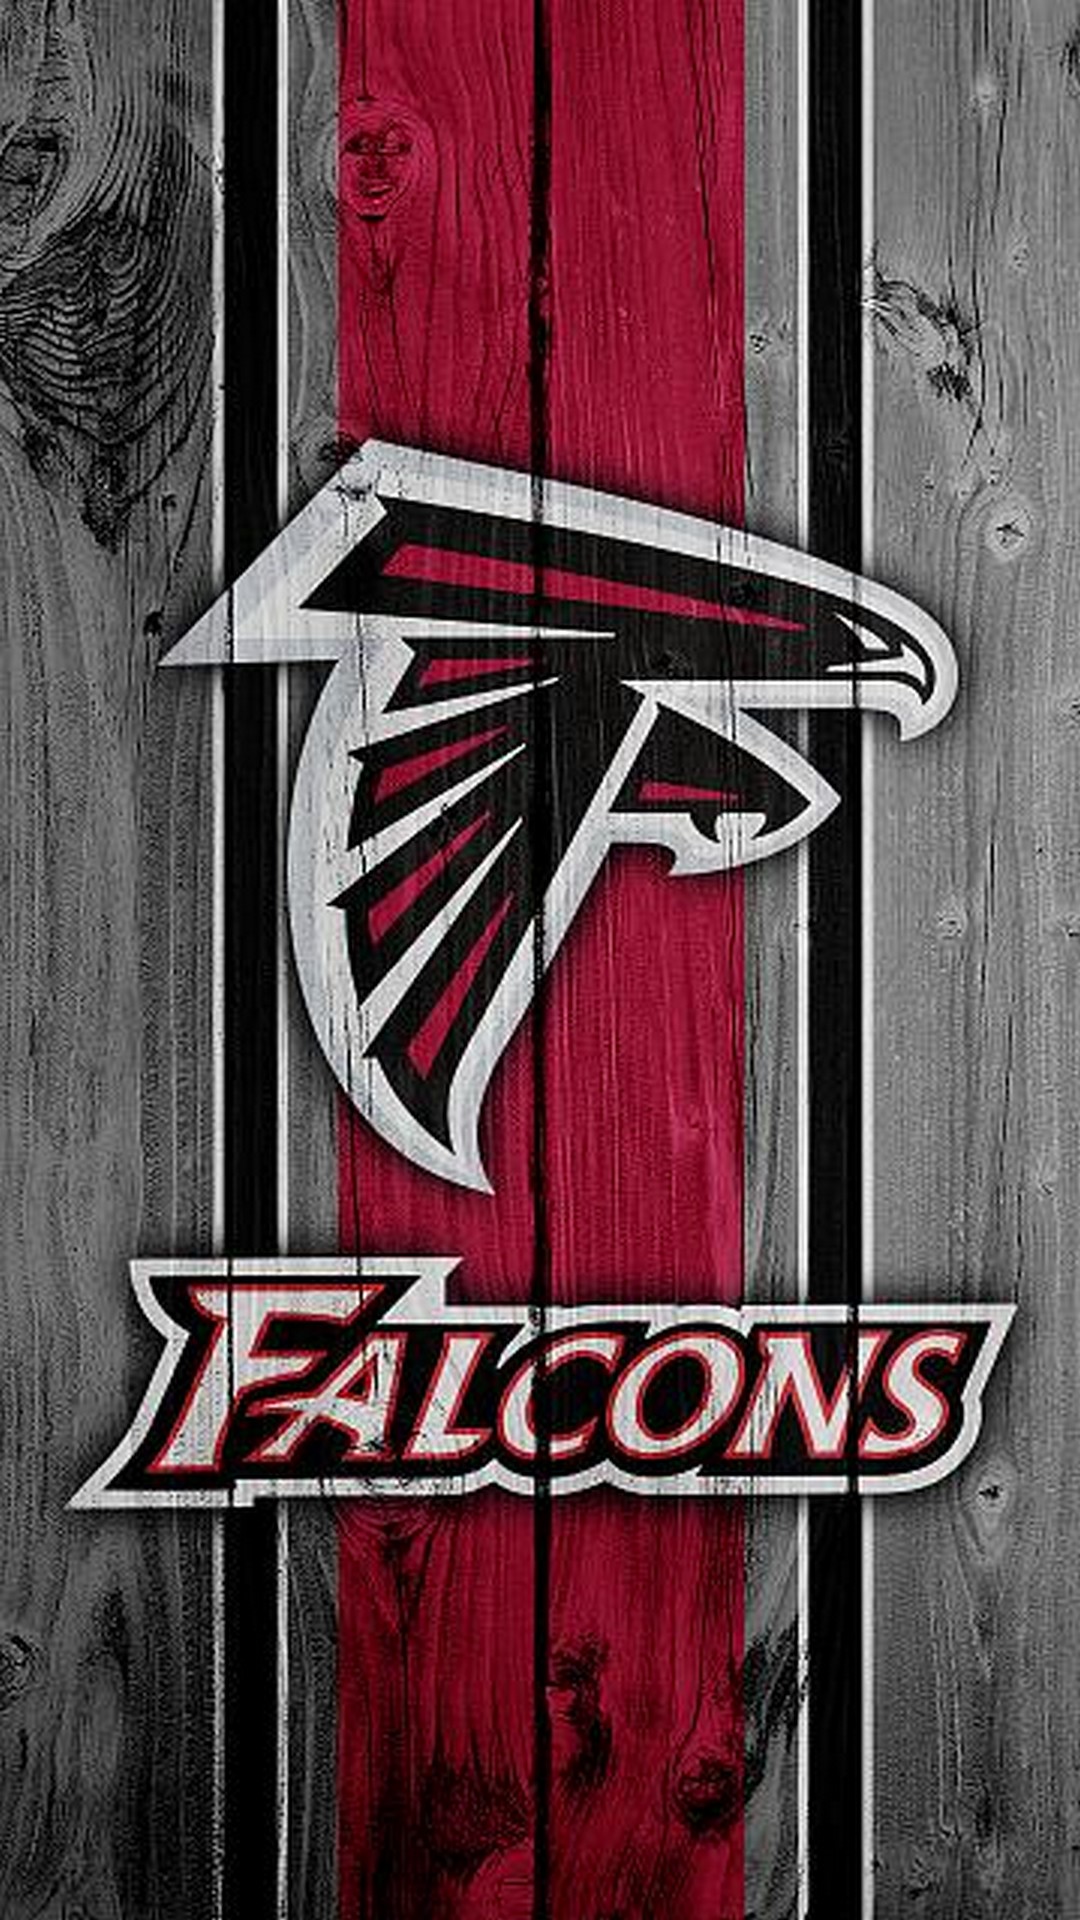 Atlanta Falcons iPhone Wallpaper HD With high-resolution 1080X1920 pixel. Download and set as wallpaper for Apple iPhone X, XS Max, XR, 8, 7, 6, SE, iPad, Android